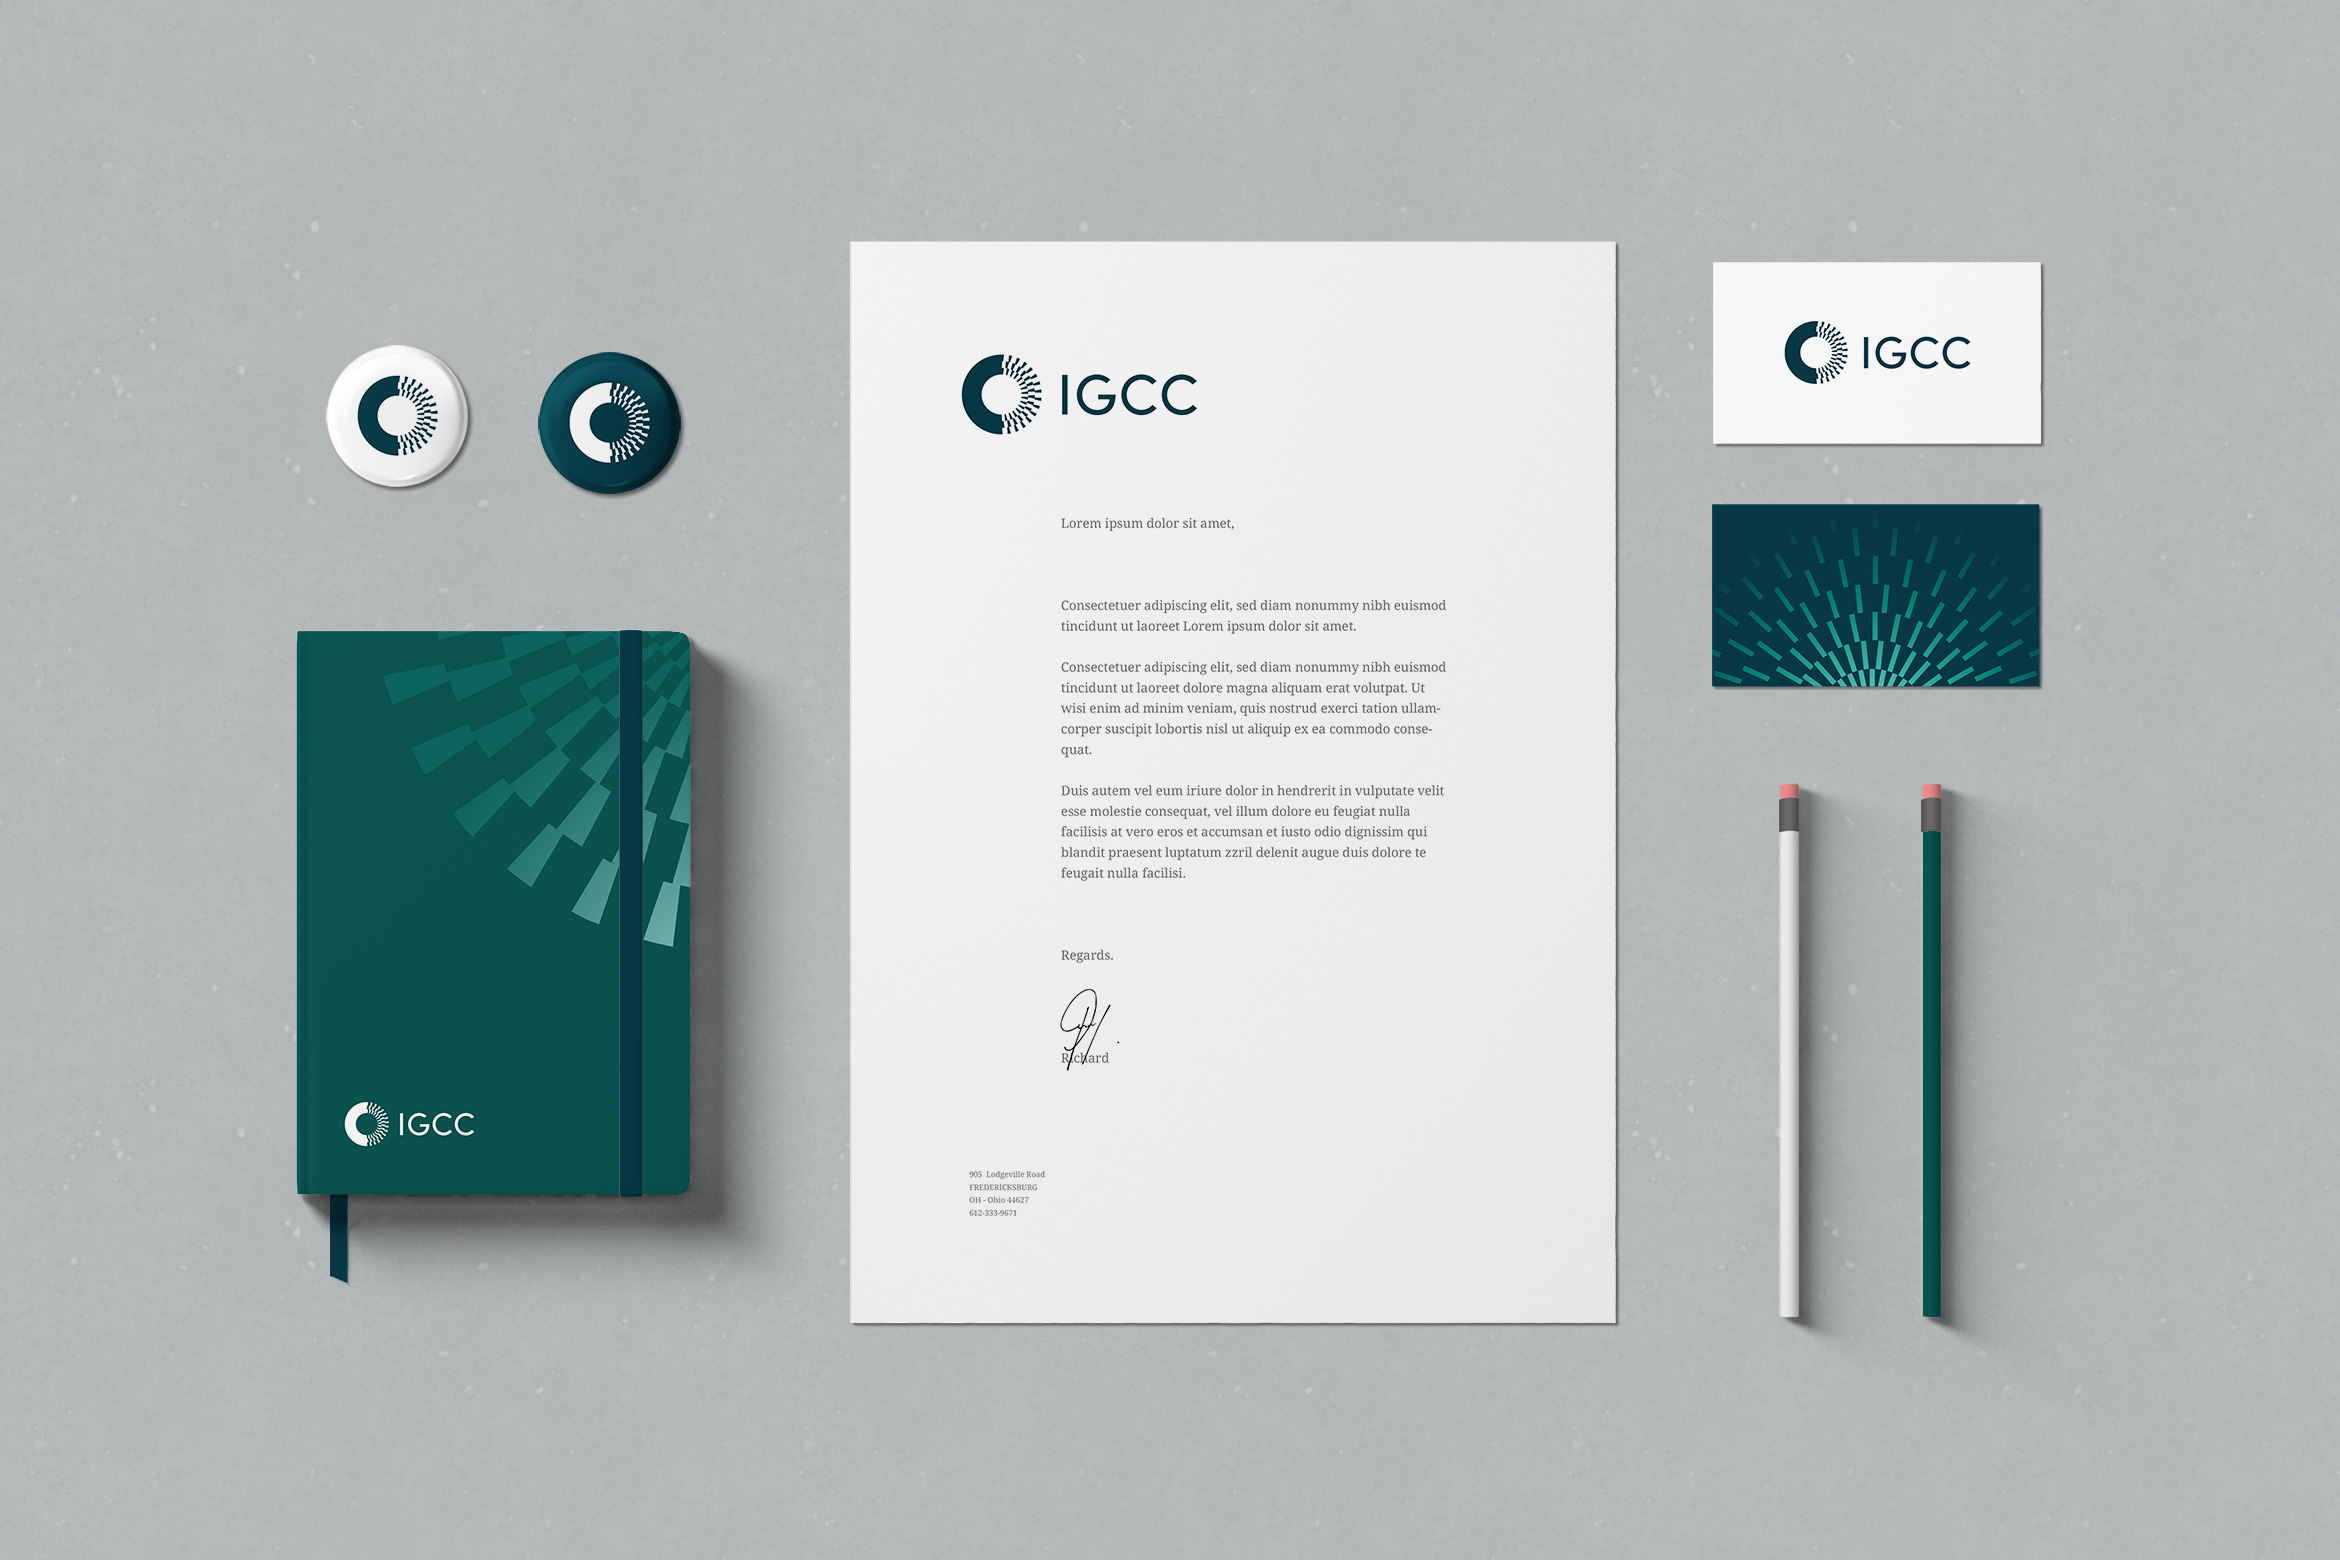 IGCC branded stationery suite with letterhead, business card, pencils, buttons and a notebook